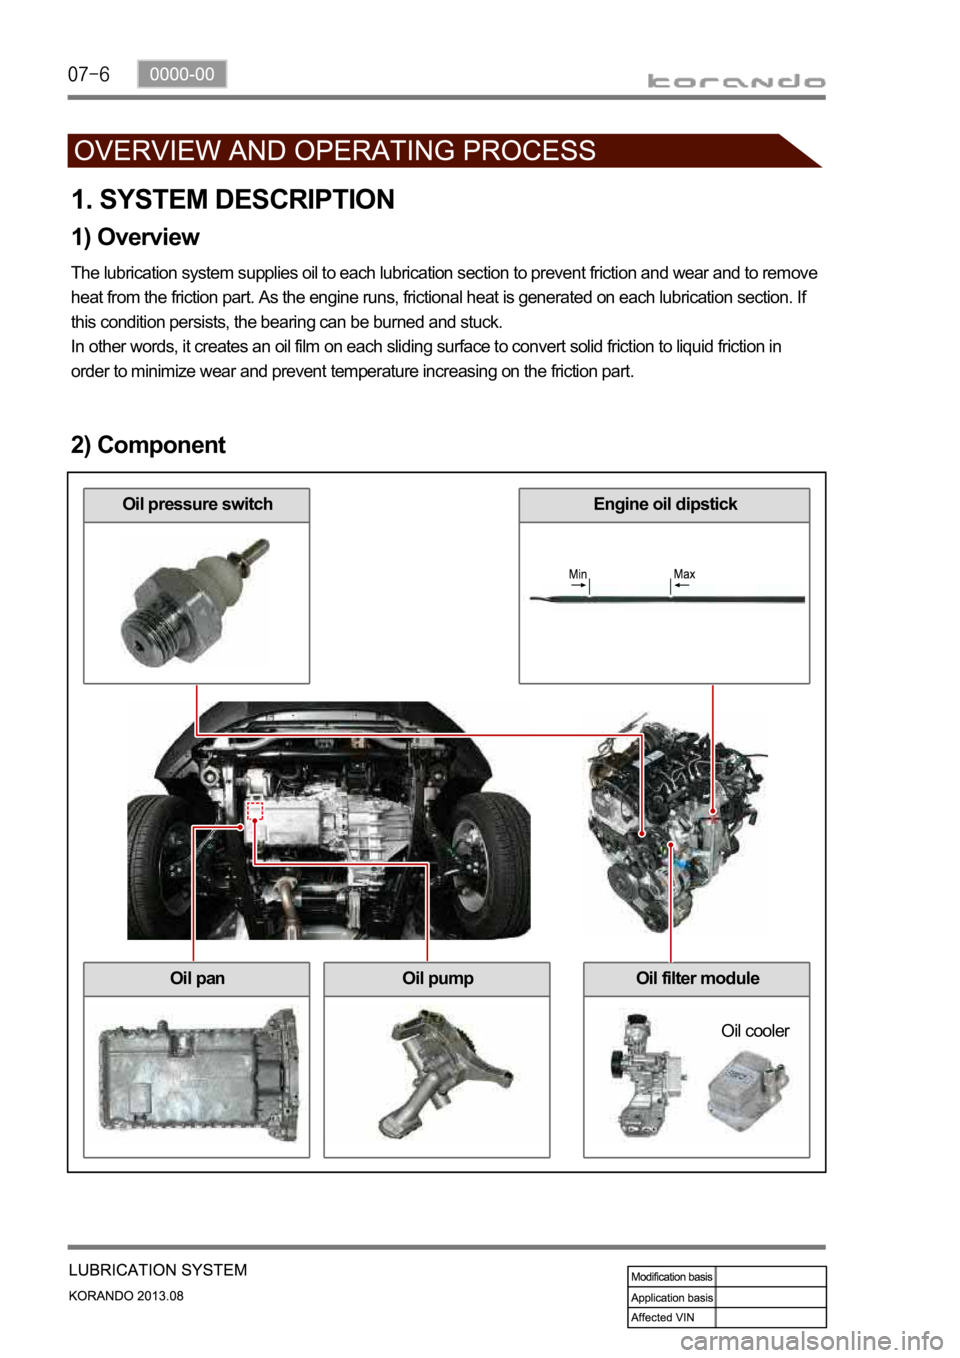 SSANGYONG KORANDO 2013 Owners Manual 1. SYSTEM DESCRIPTION
1) Overview
The lubrication system supplies oil to each lubrication section to prevent friction and wear and to remove 
heat from the friction part. As the engine runs, frictiona